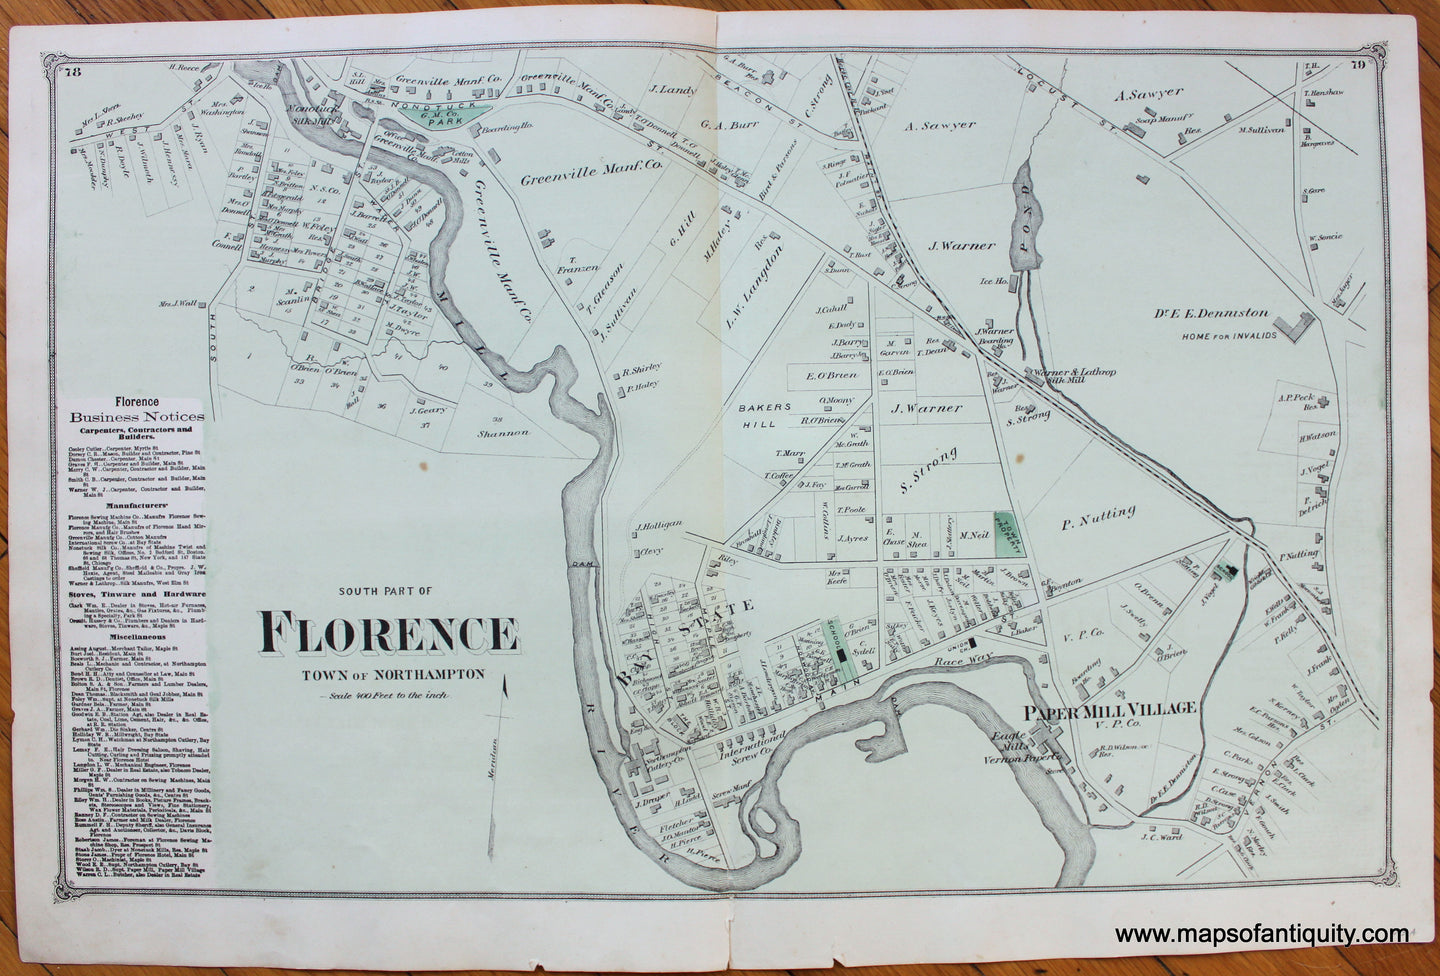 Antique-Hand-Colored-Map-South-Part-of-Florence-pp.-78-79-(MA)-Massachusetts-Hampshire-County-1873-Beers-Maps-Of-Antiquity